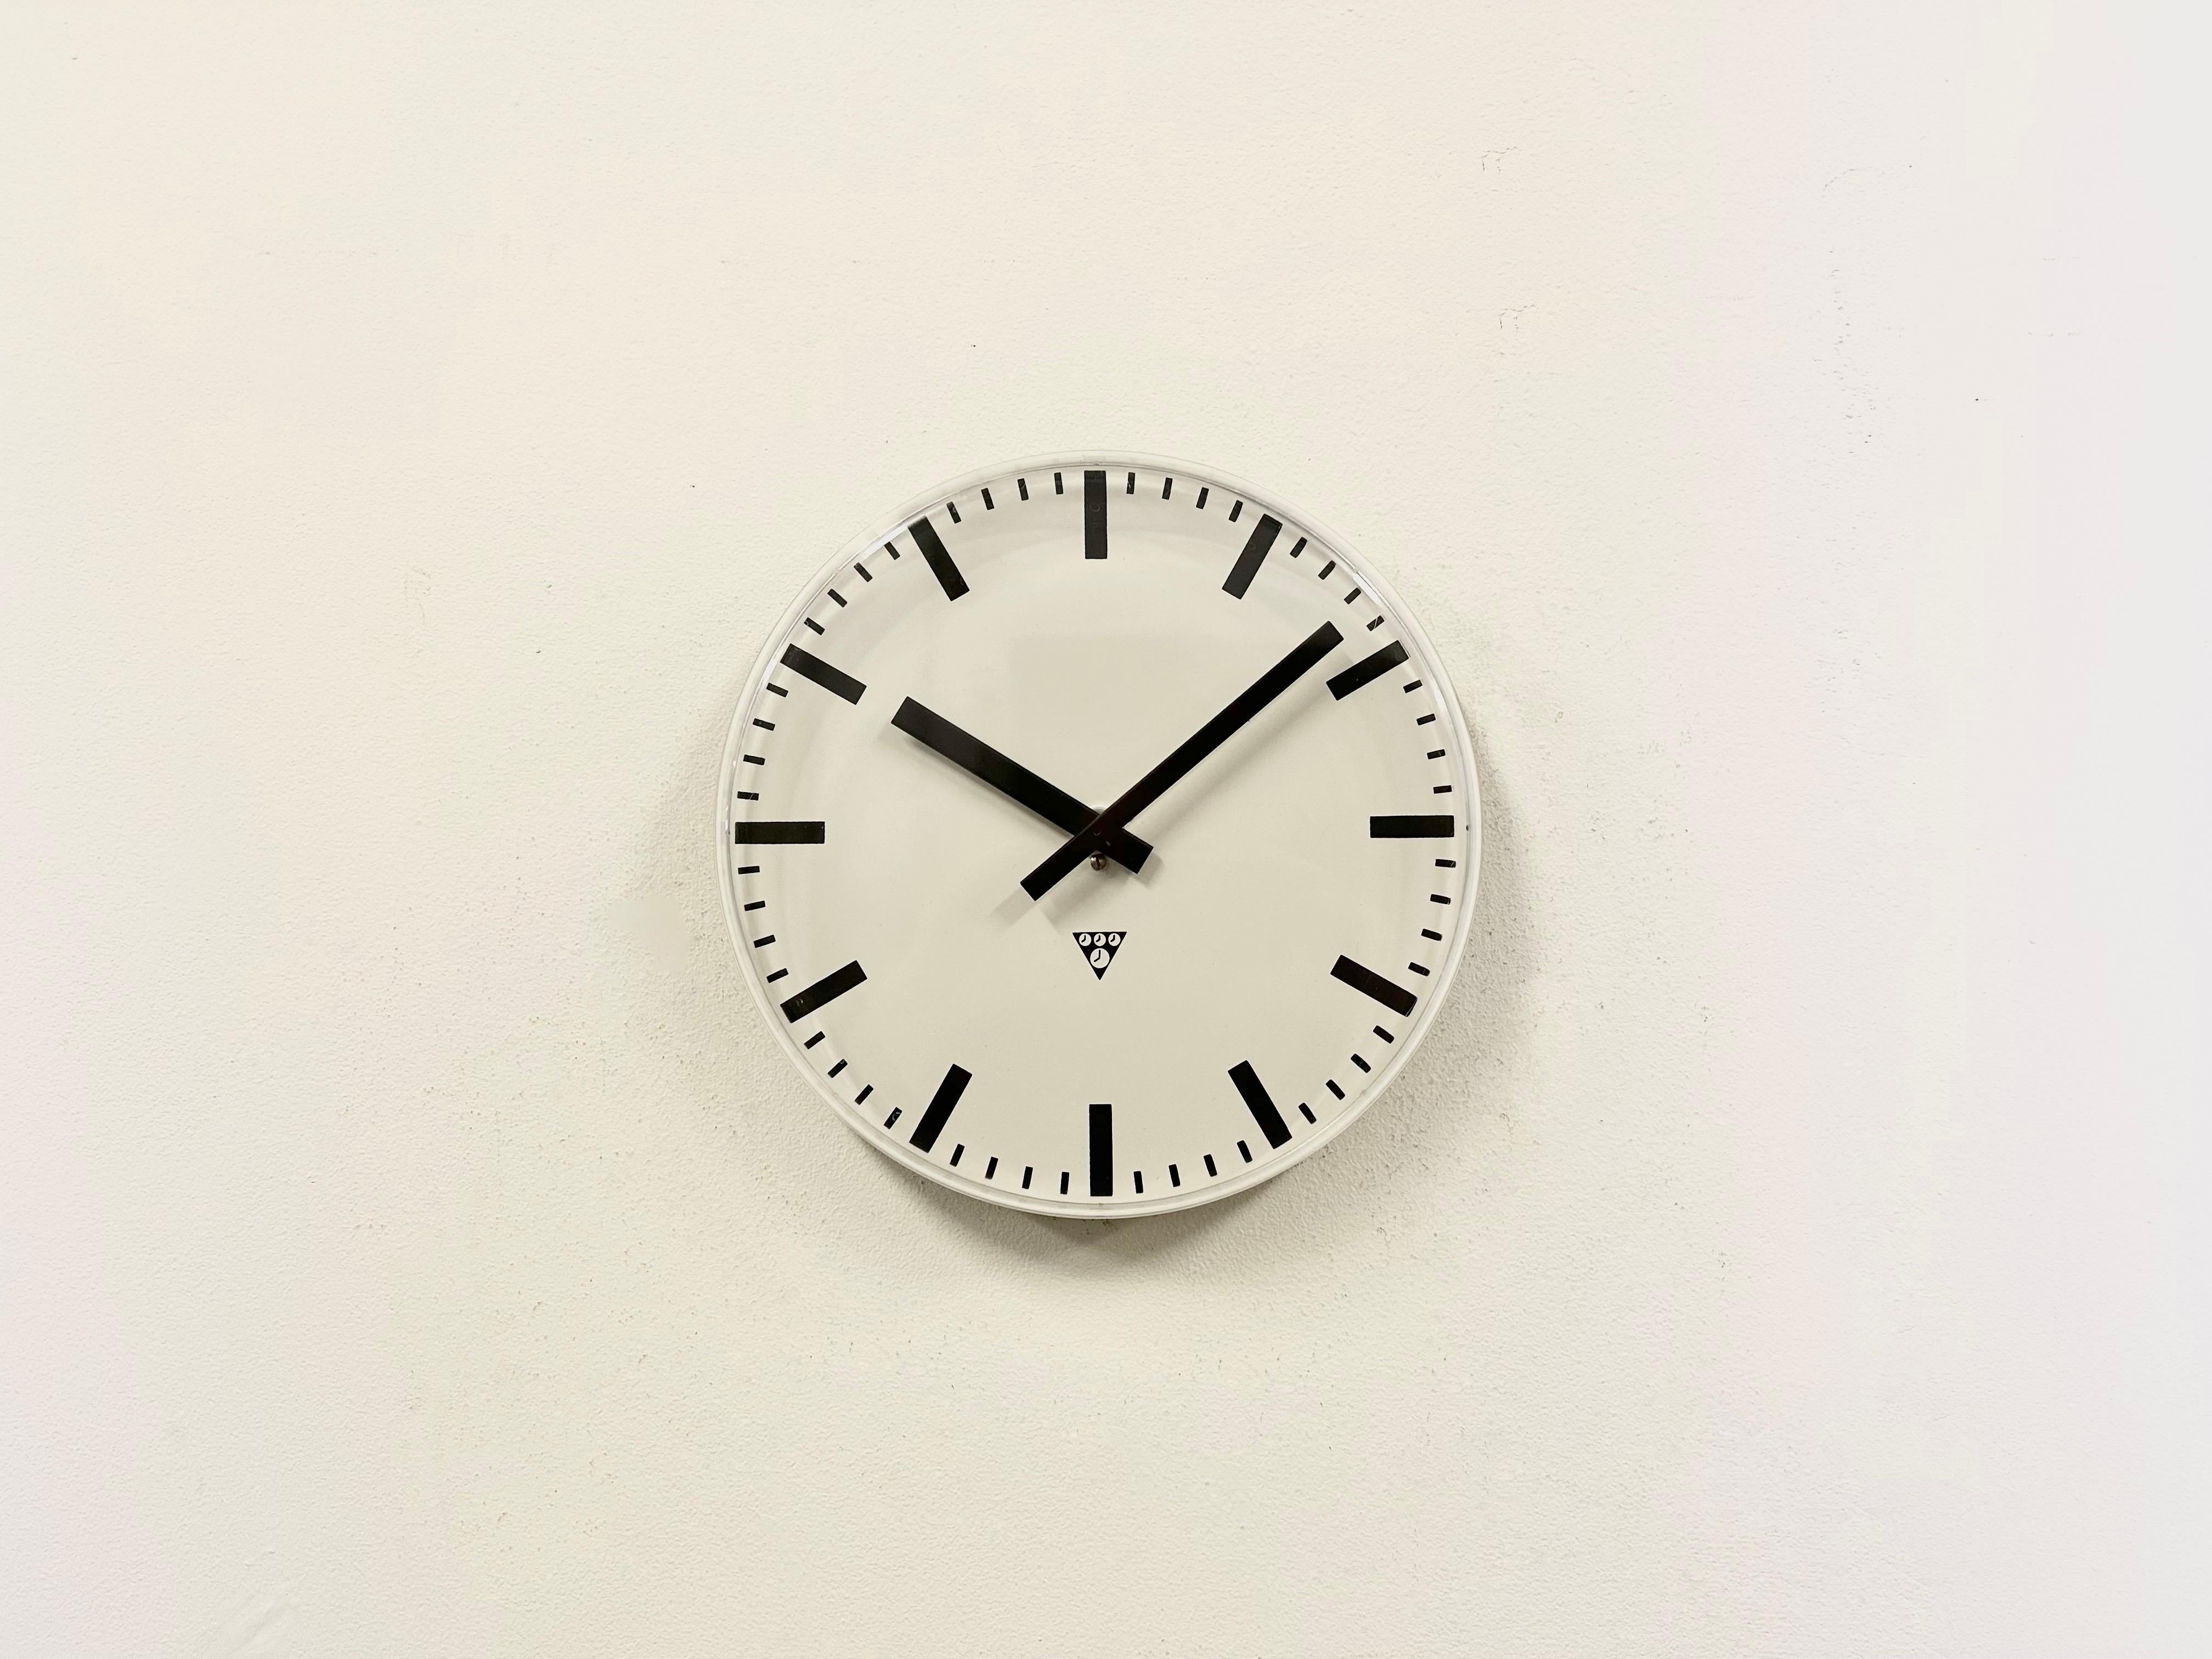 Industrial wall clock was produced by Pragotron in former Czechoslovakia during the 1980s. It features a white aluminium dial and a curved plastic glass cover. The piece has been converted into a battery-powered clockwork and requires only one